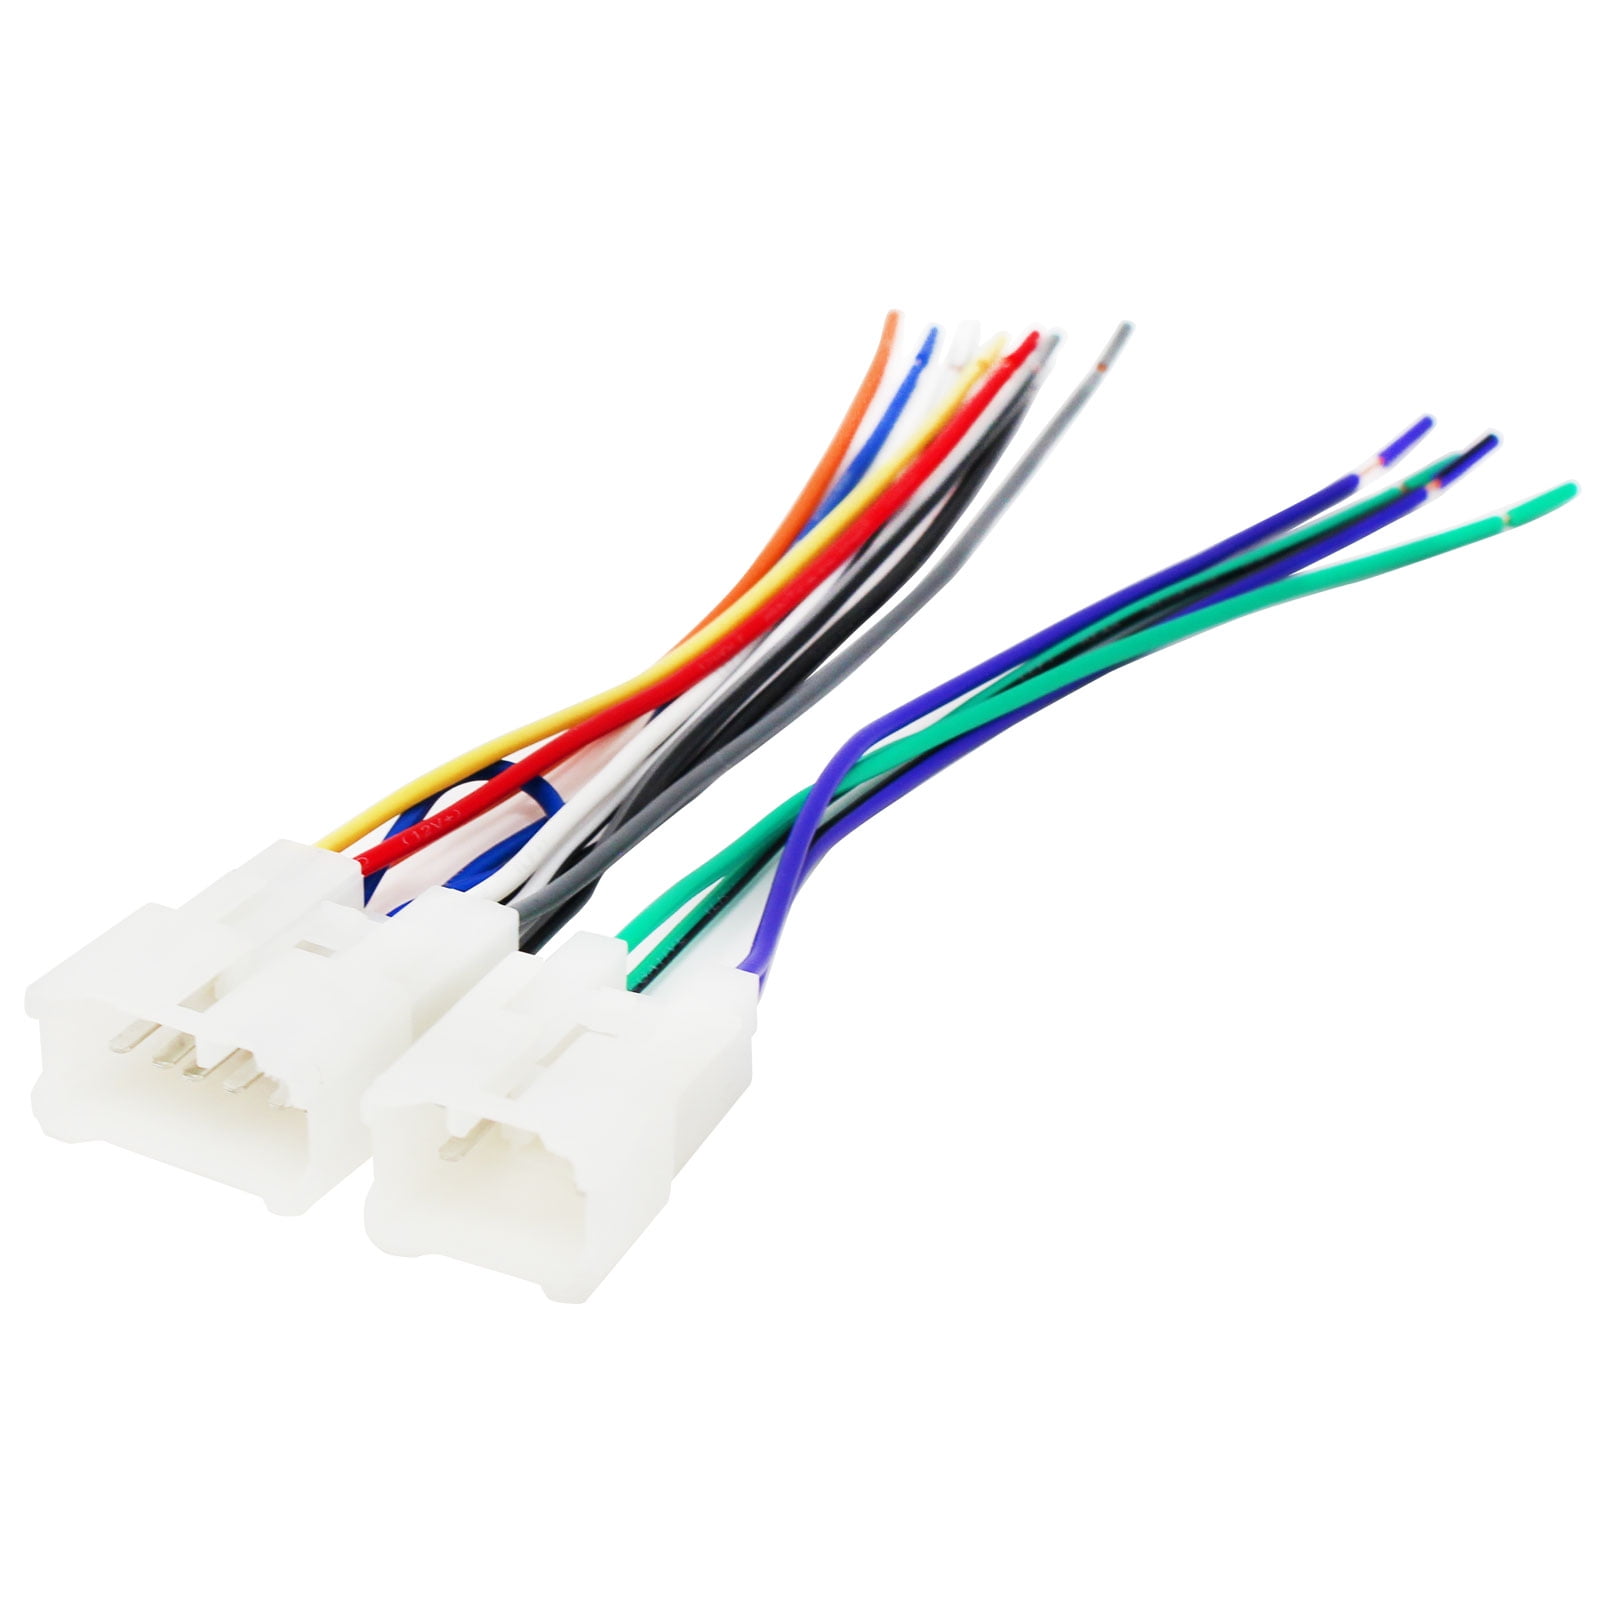 Toyota Camry Radio Wiring Harness from i5.walmartimages.com